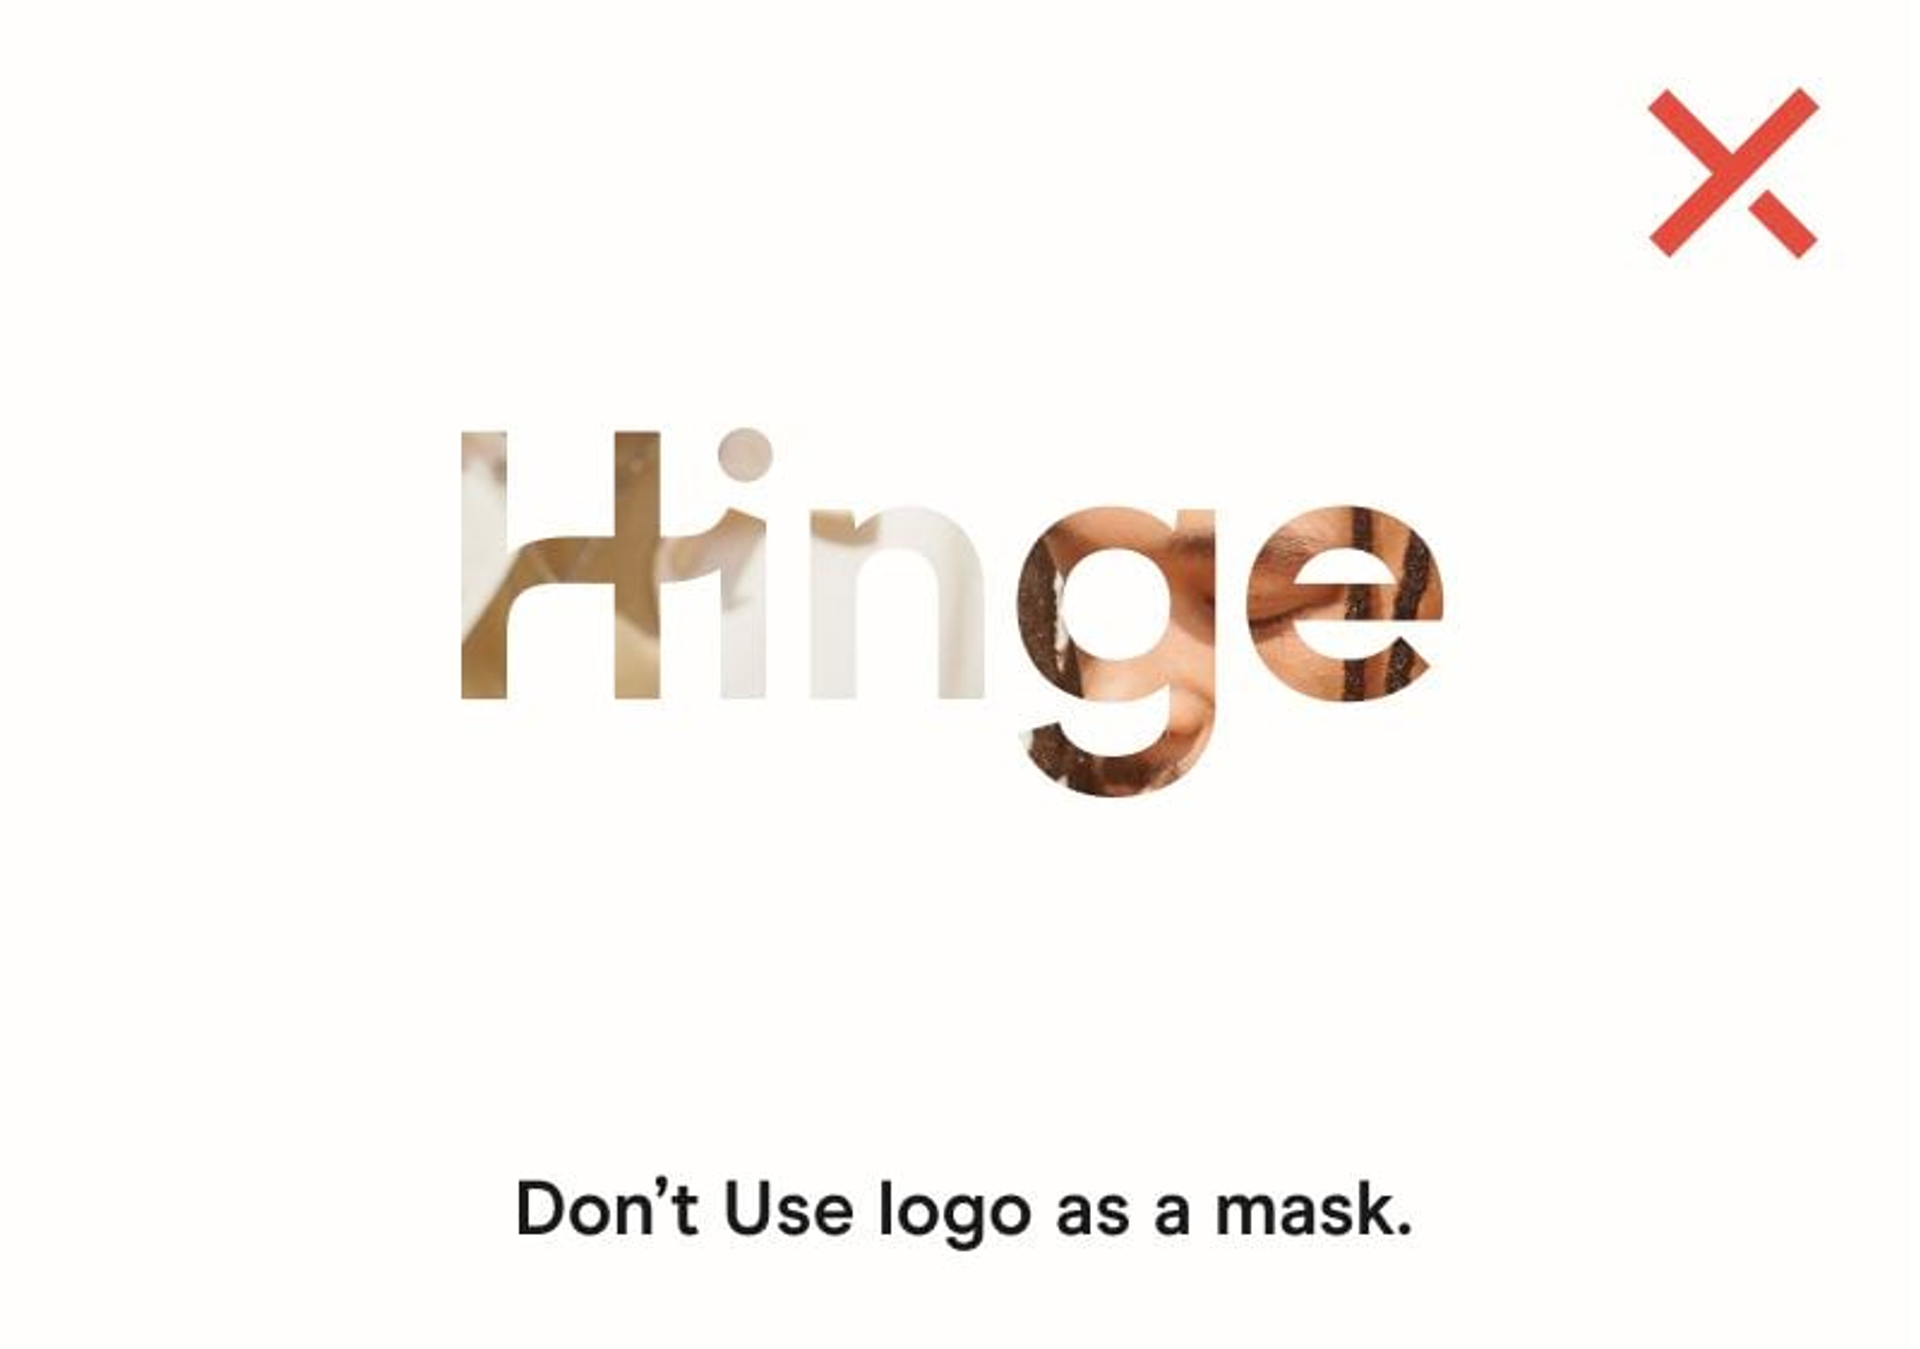 Don't use the logo as a mask.